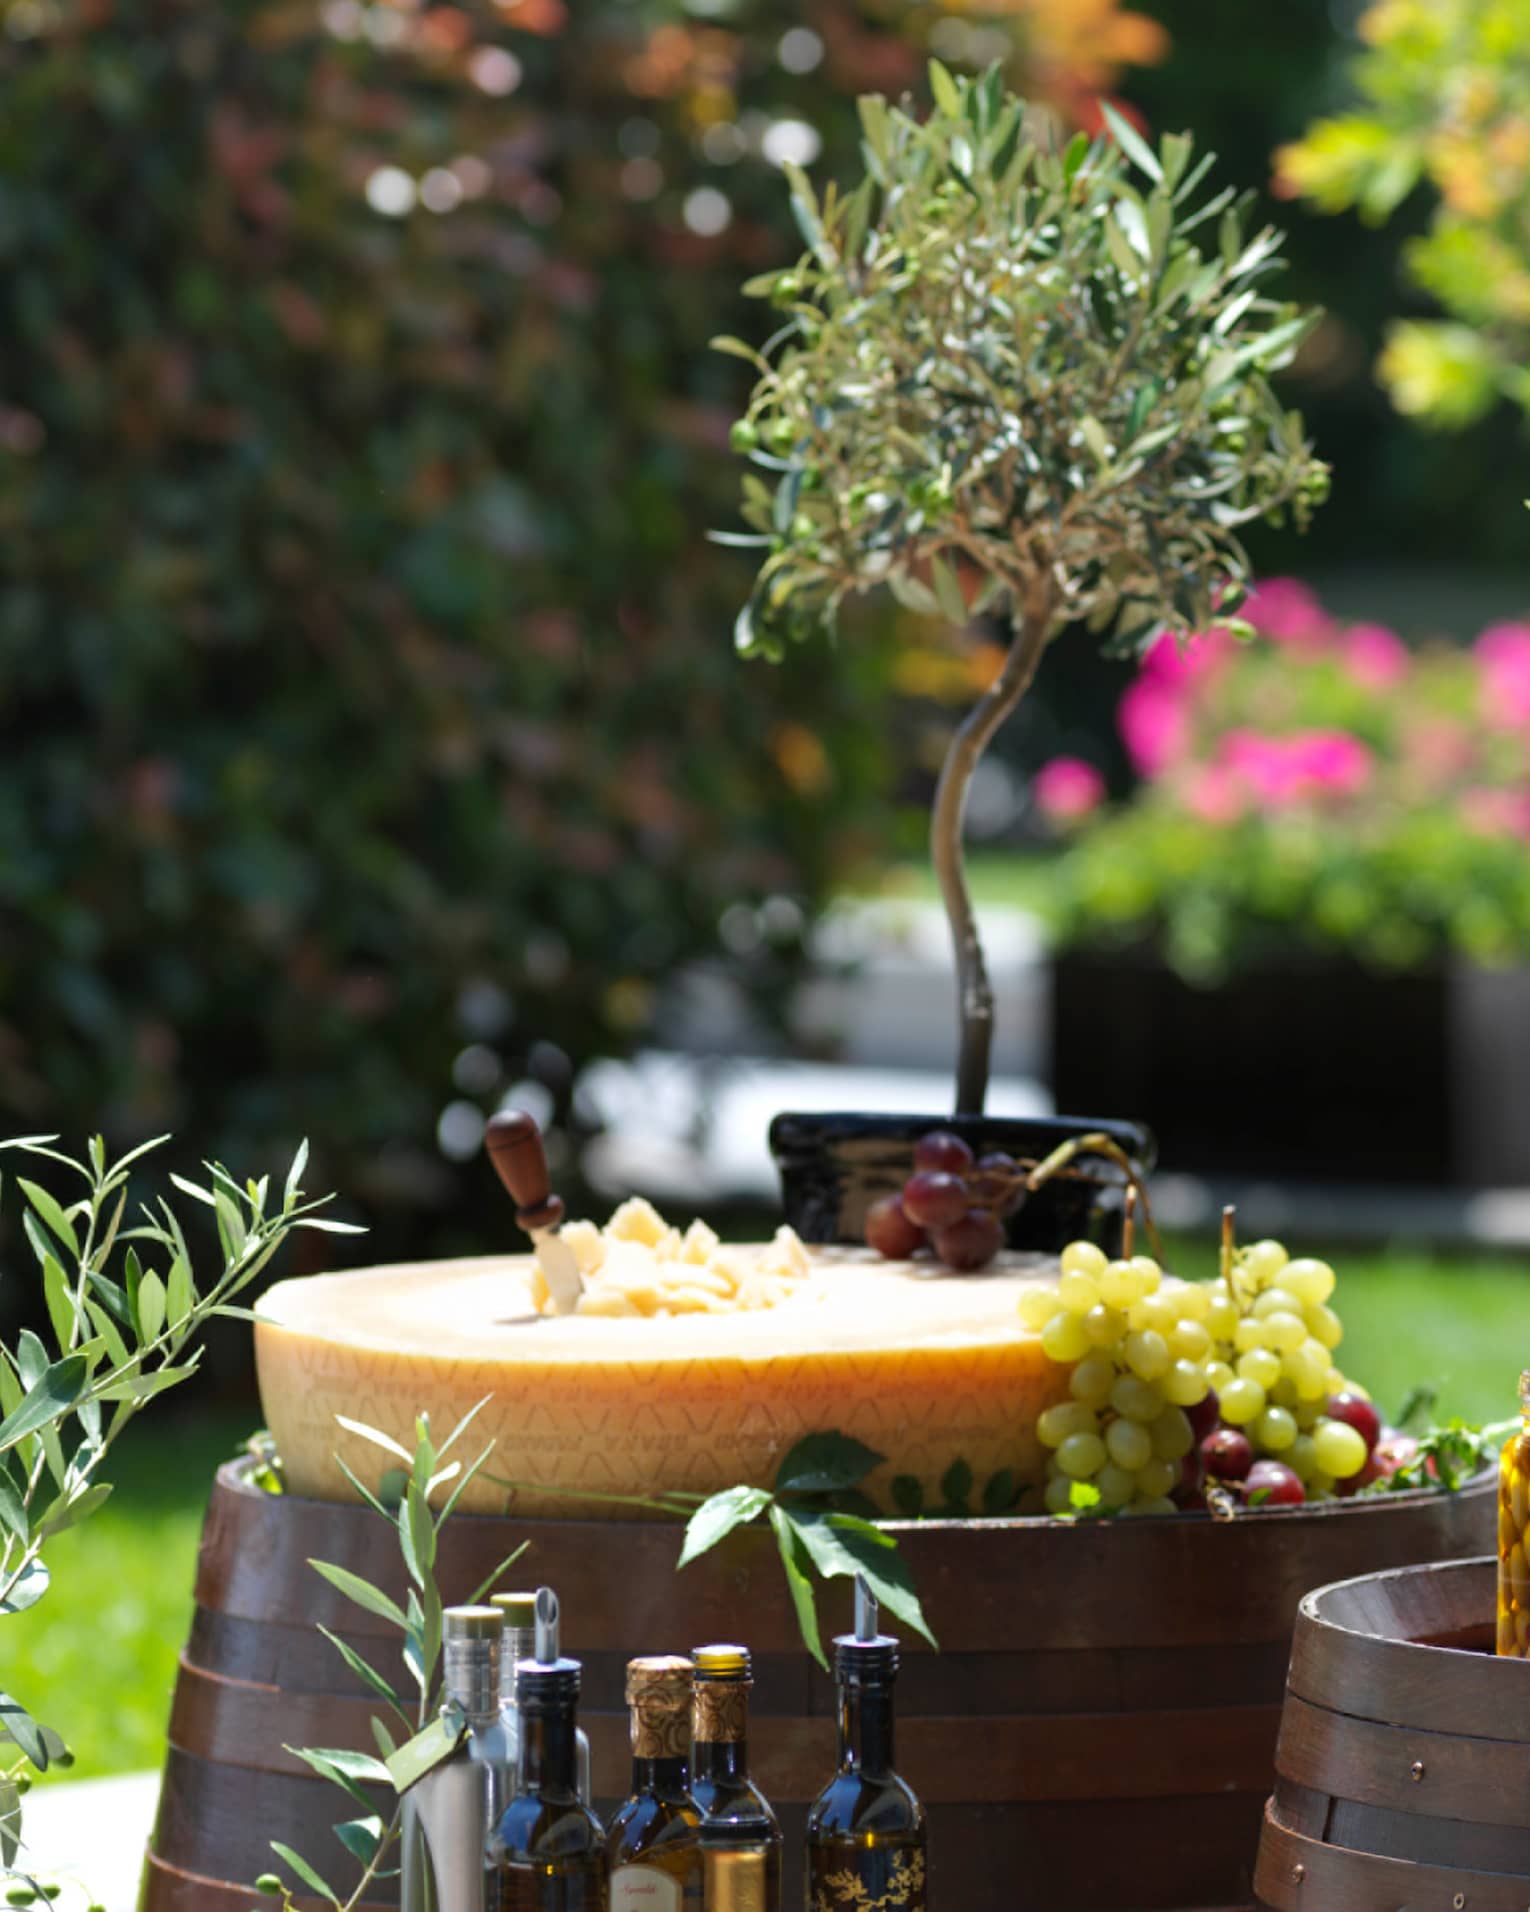 Potted olive trees, jars of olives, bottles of oil, a Parmesan cheese wheel, and grapes served atop two barrels in a garden.